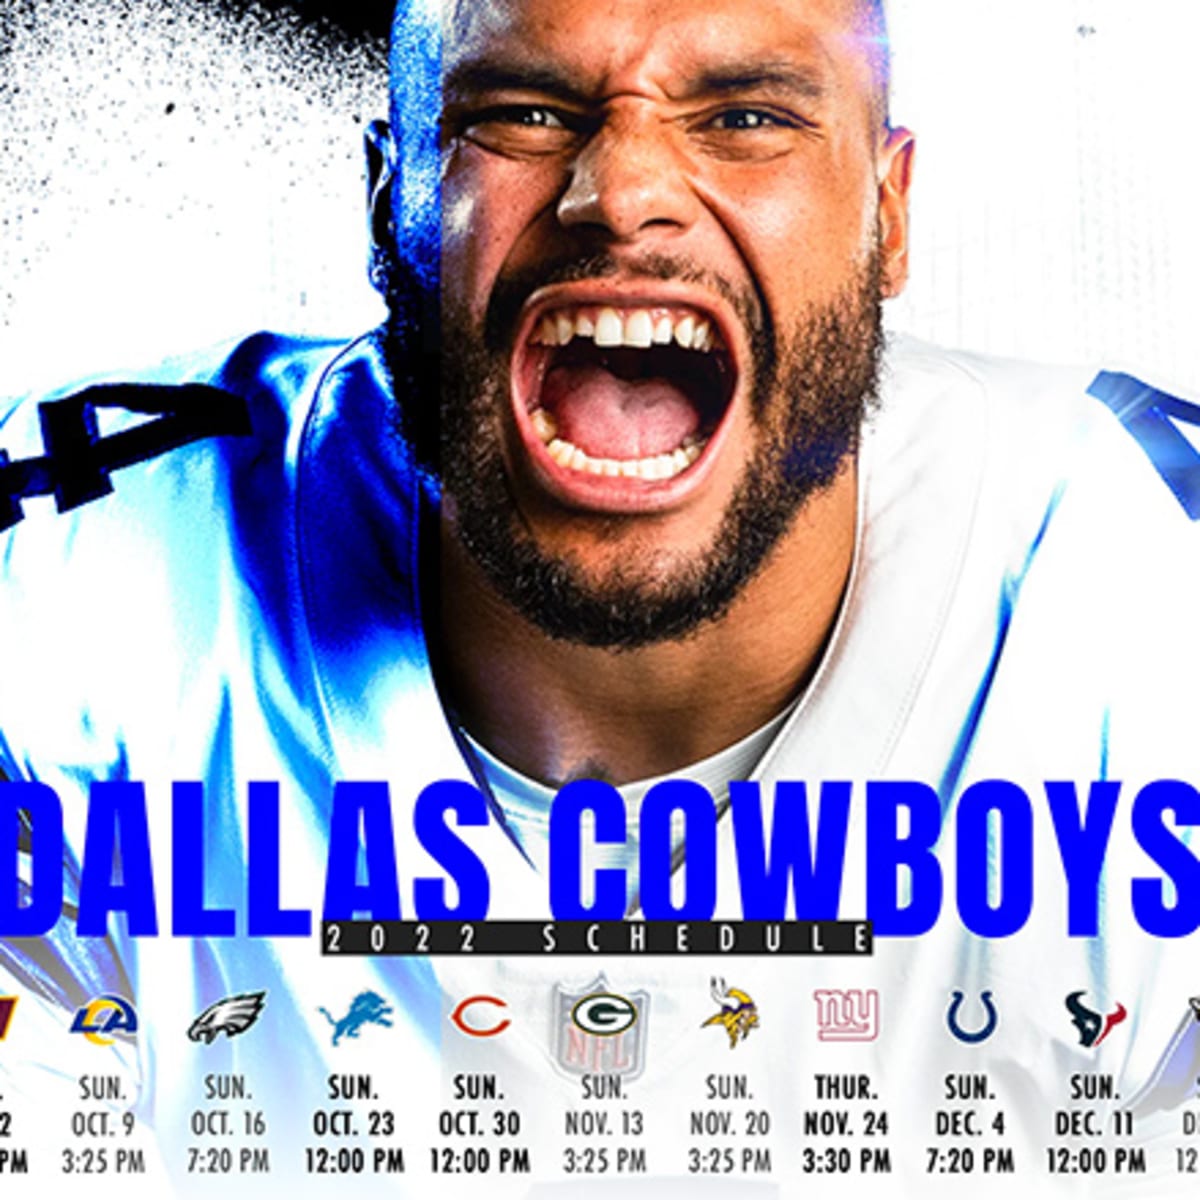 dallas cowboys today what channel